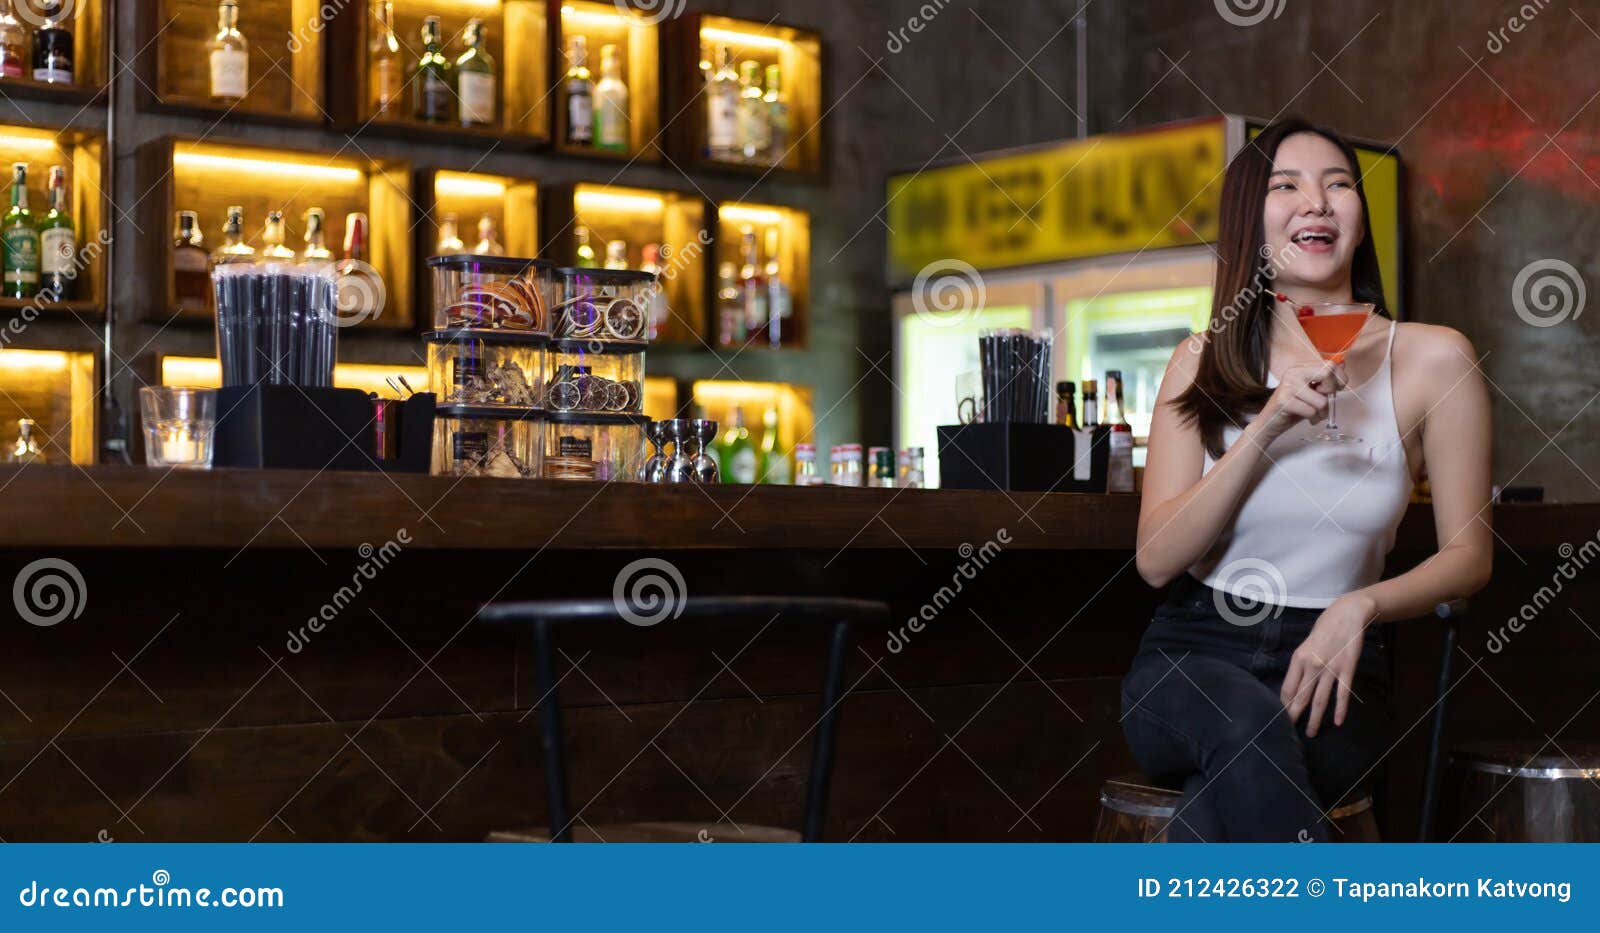 Asian Alone Women Enjoy Cocktails in Front of a Vintage Bar, Relaxing ...